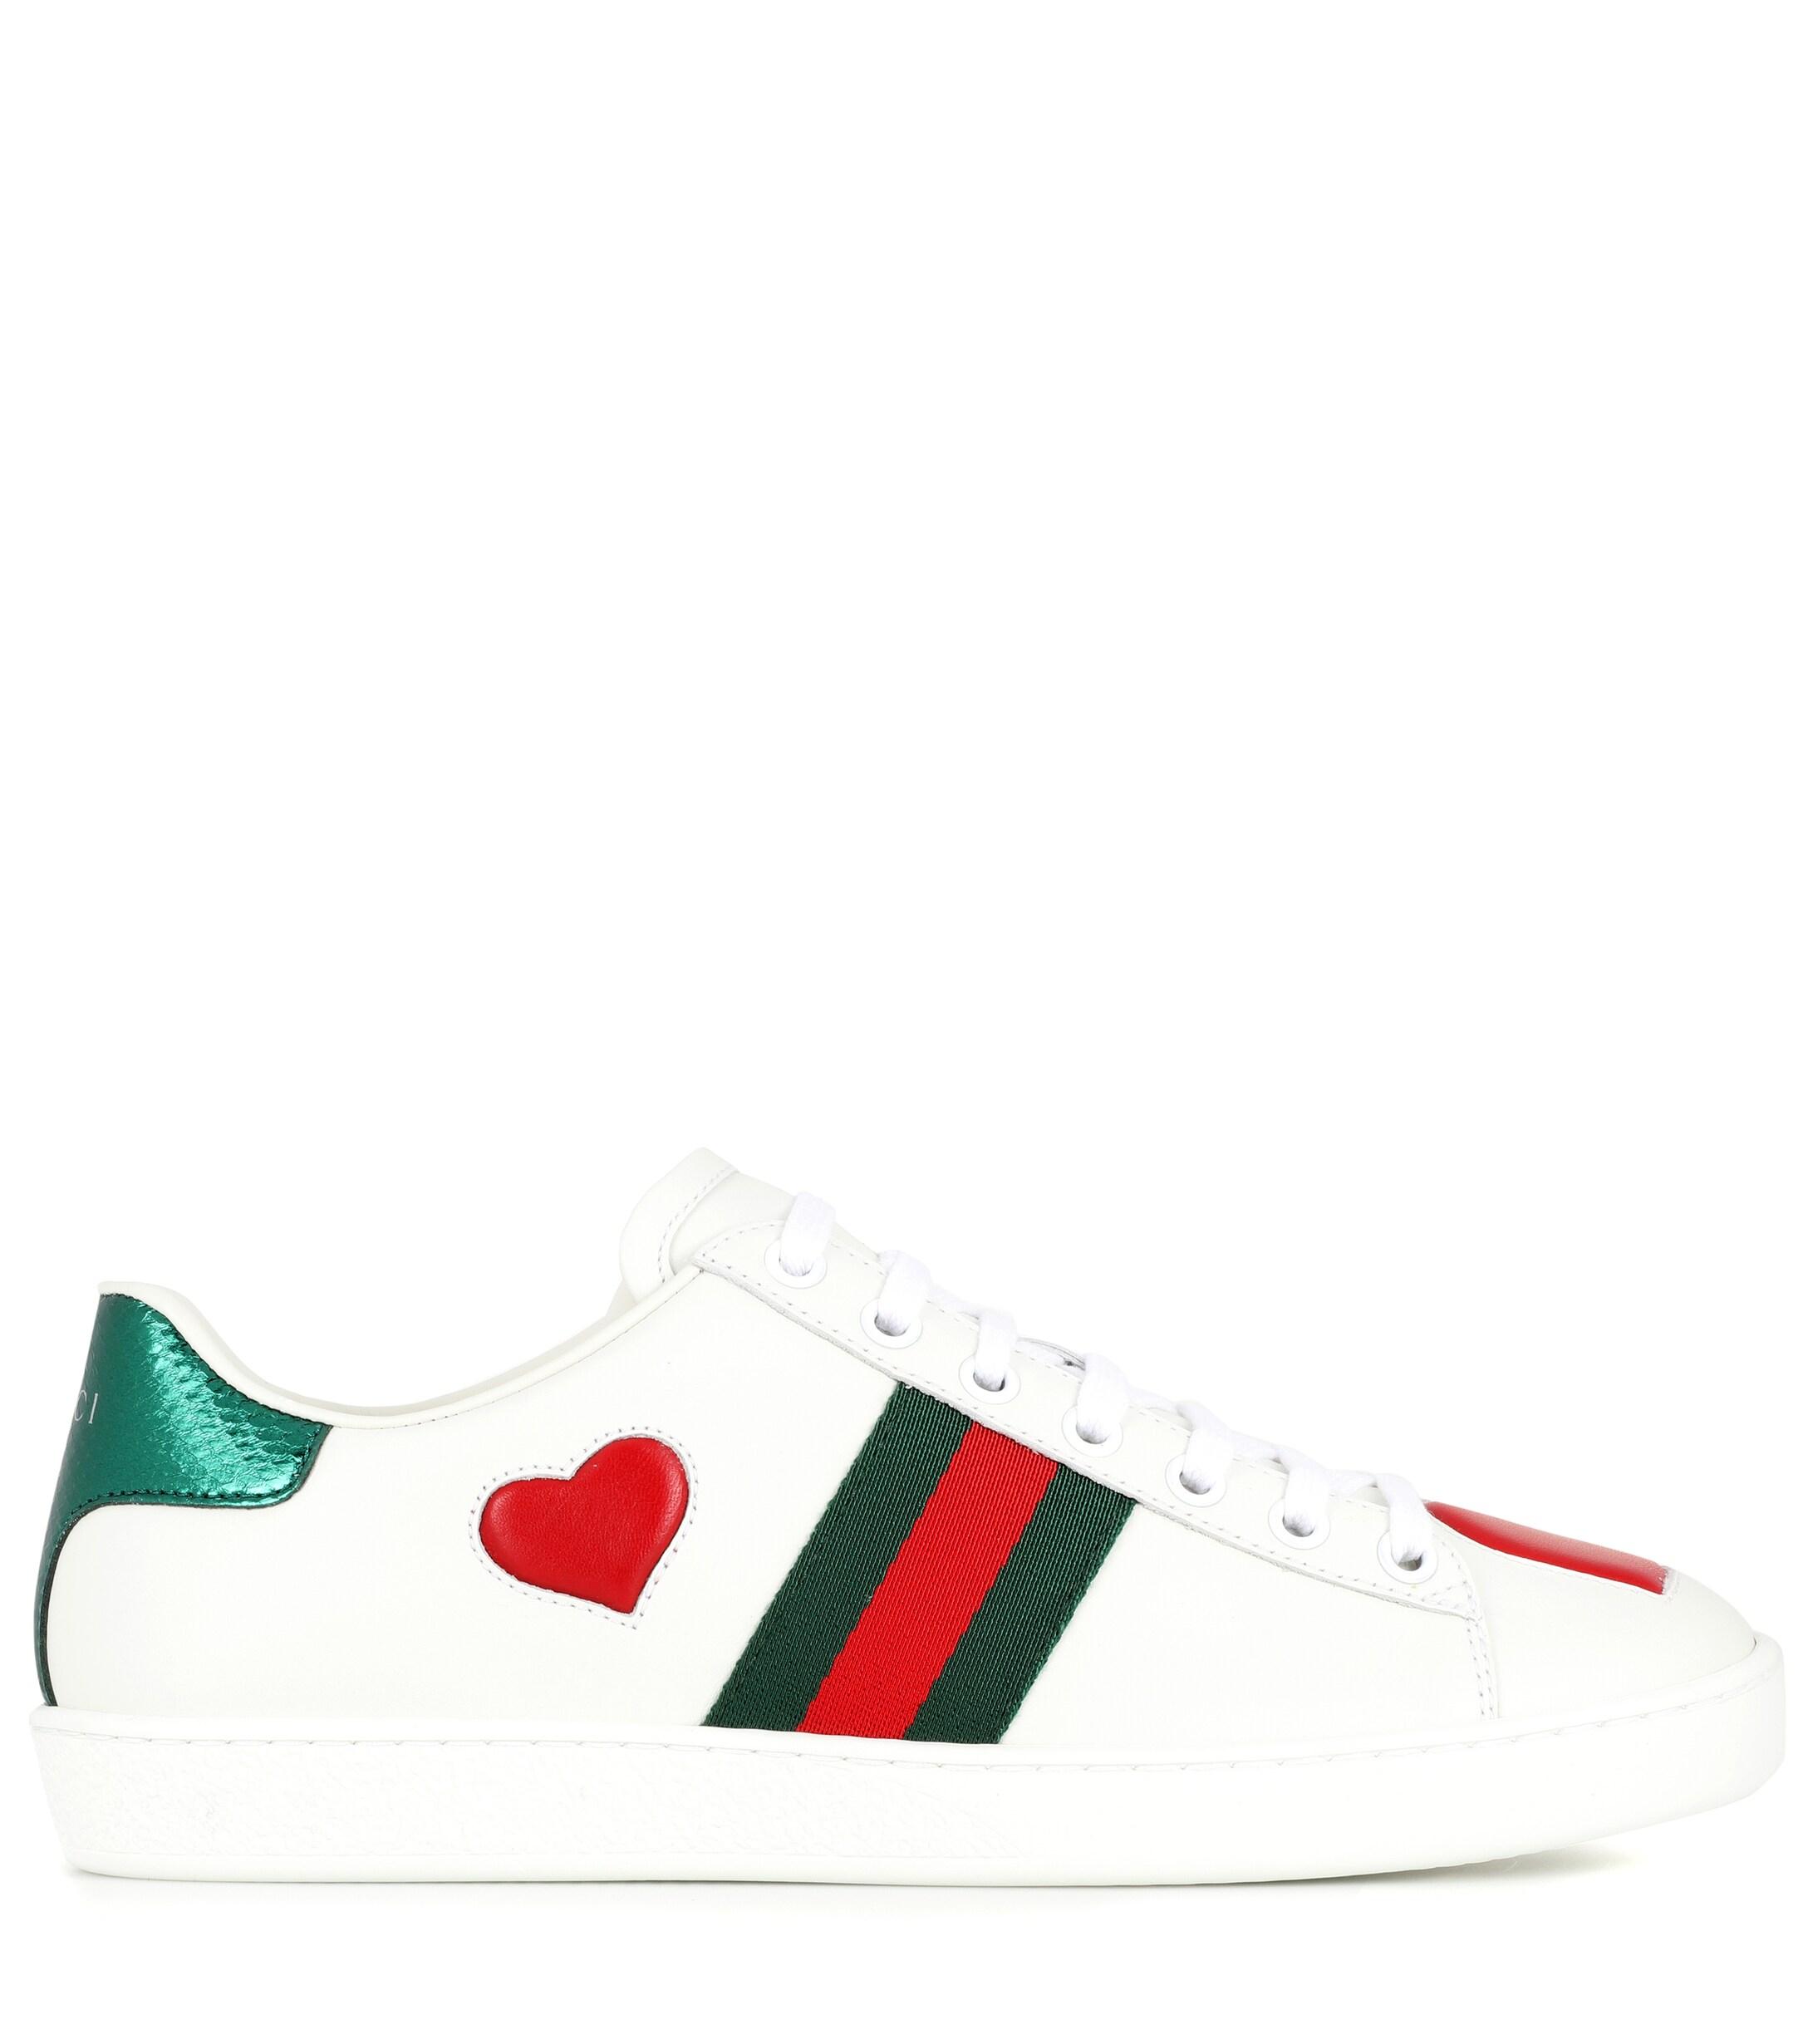 Gucci Ace Heart-embellished Leather Sneakers in White | Lyst